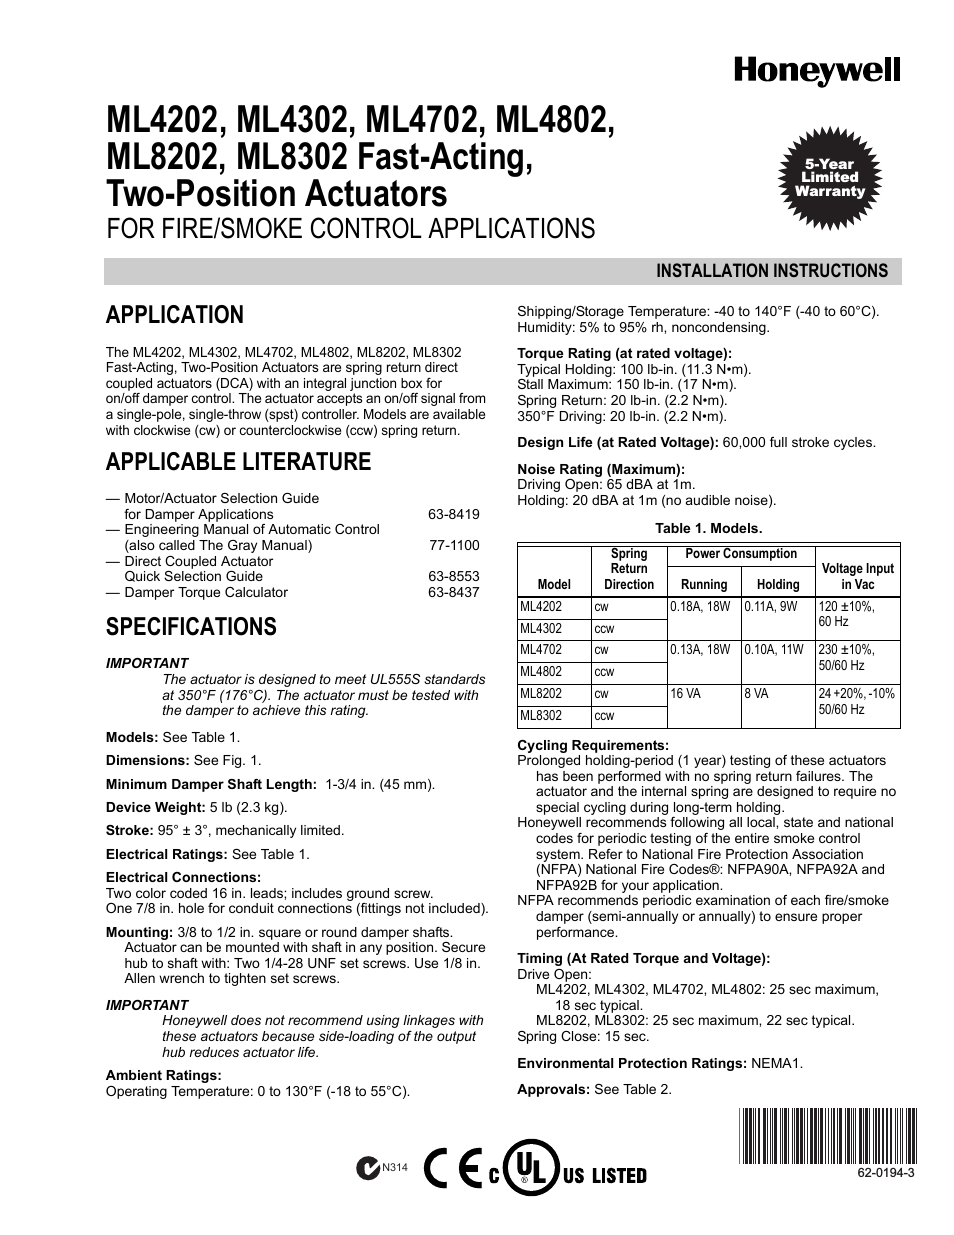 TWO-POSITION ACTUATORS ML4702 (Page 1)